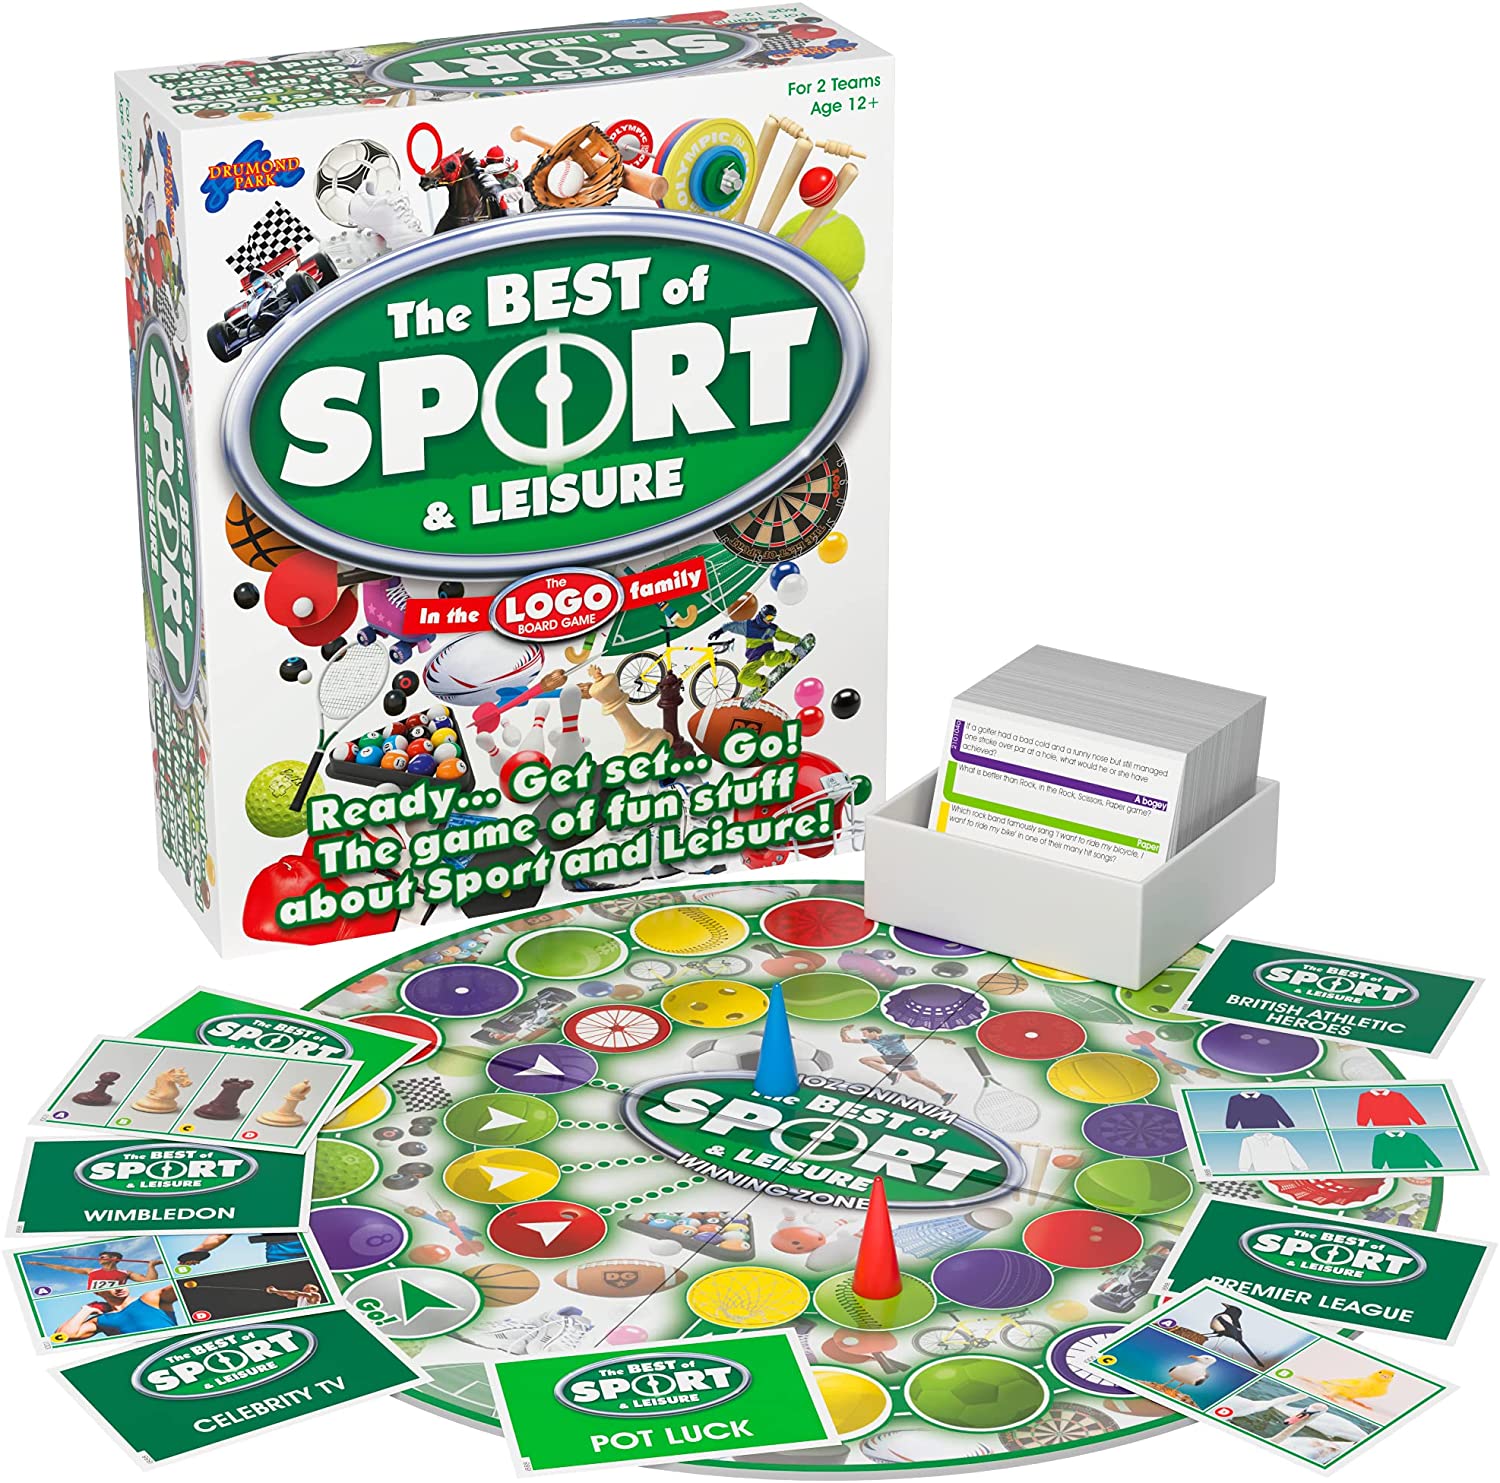 LOGO The Best of Sport Game